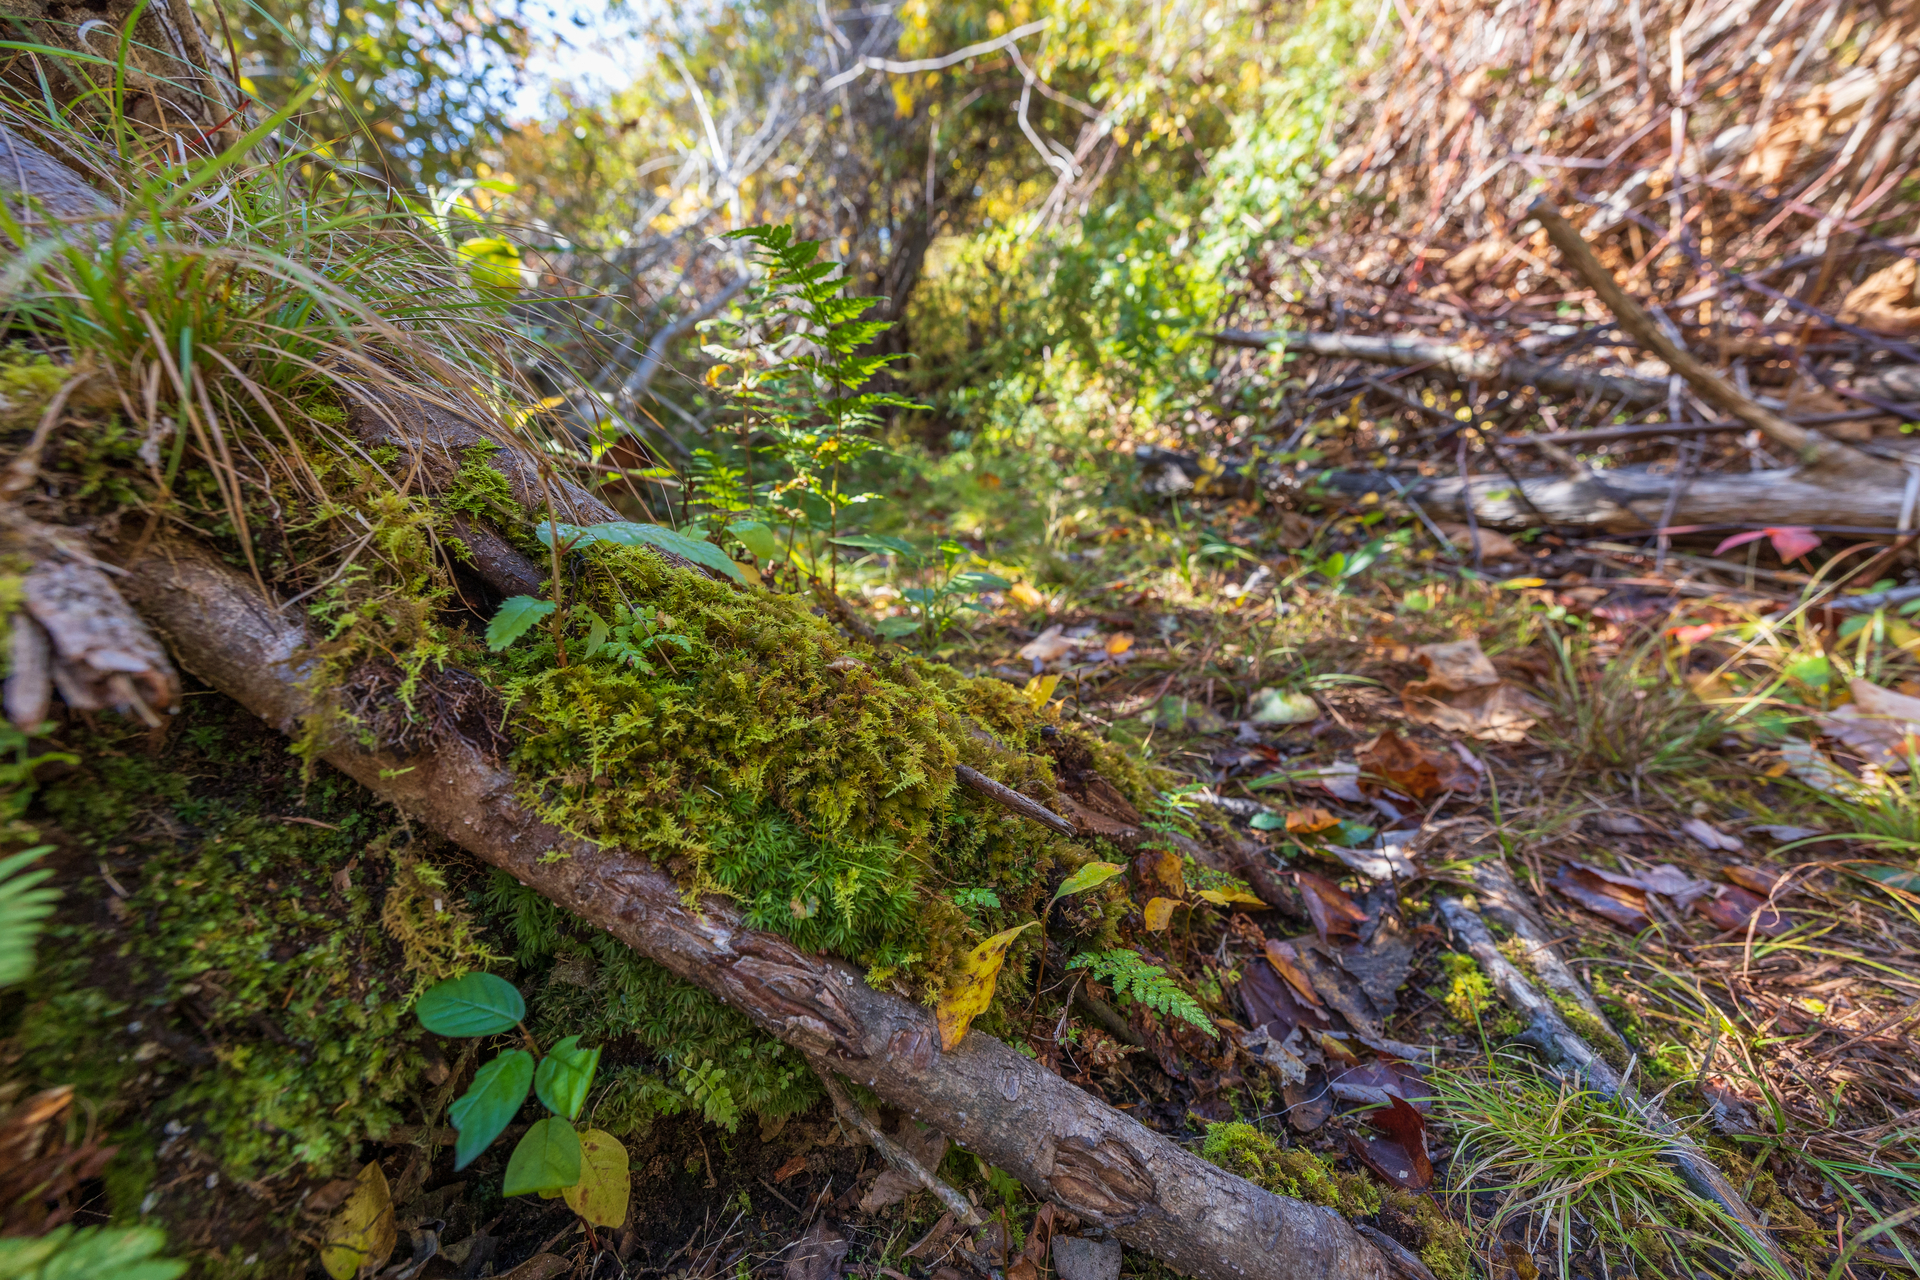 A patch of moss with a stick laying across it in the foreground. In the background is a forest floor with branches, brown and orange leaves, and grass.